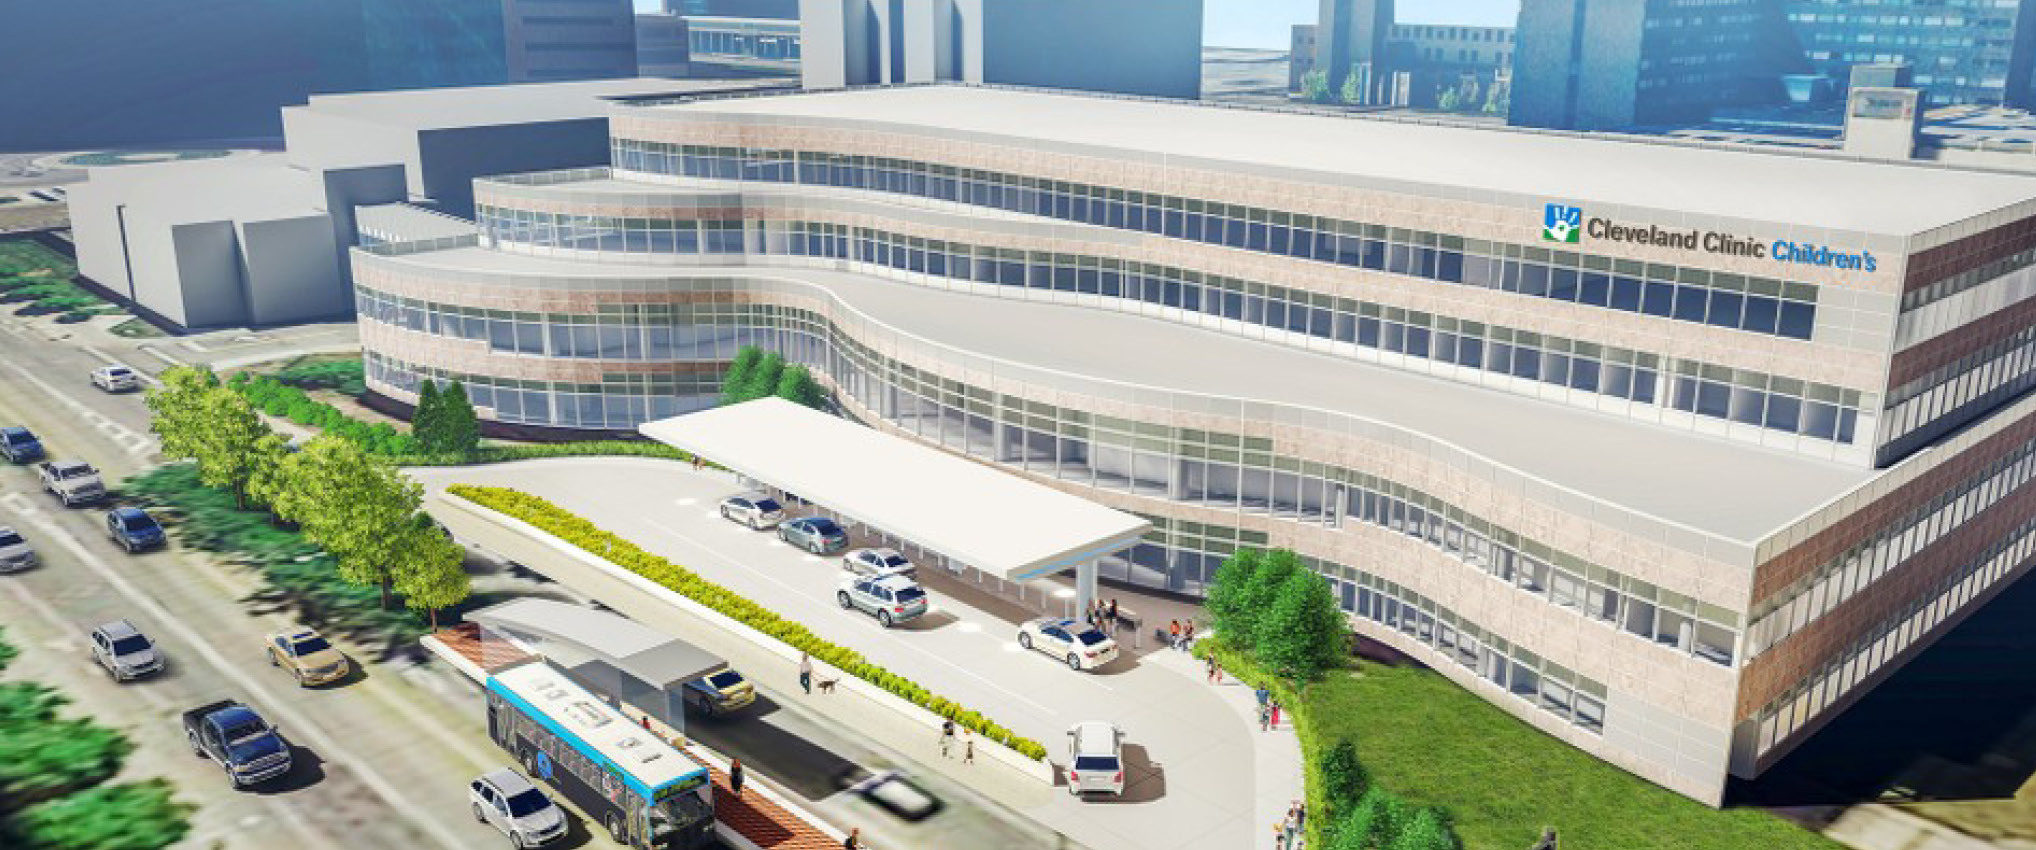 Cleveland Clinic Children’s to Open Its First Standalone Outpatient Center